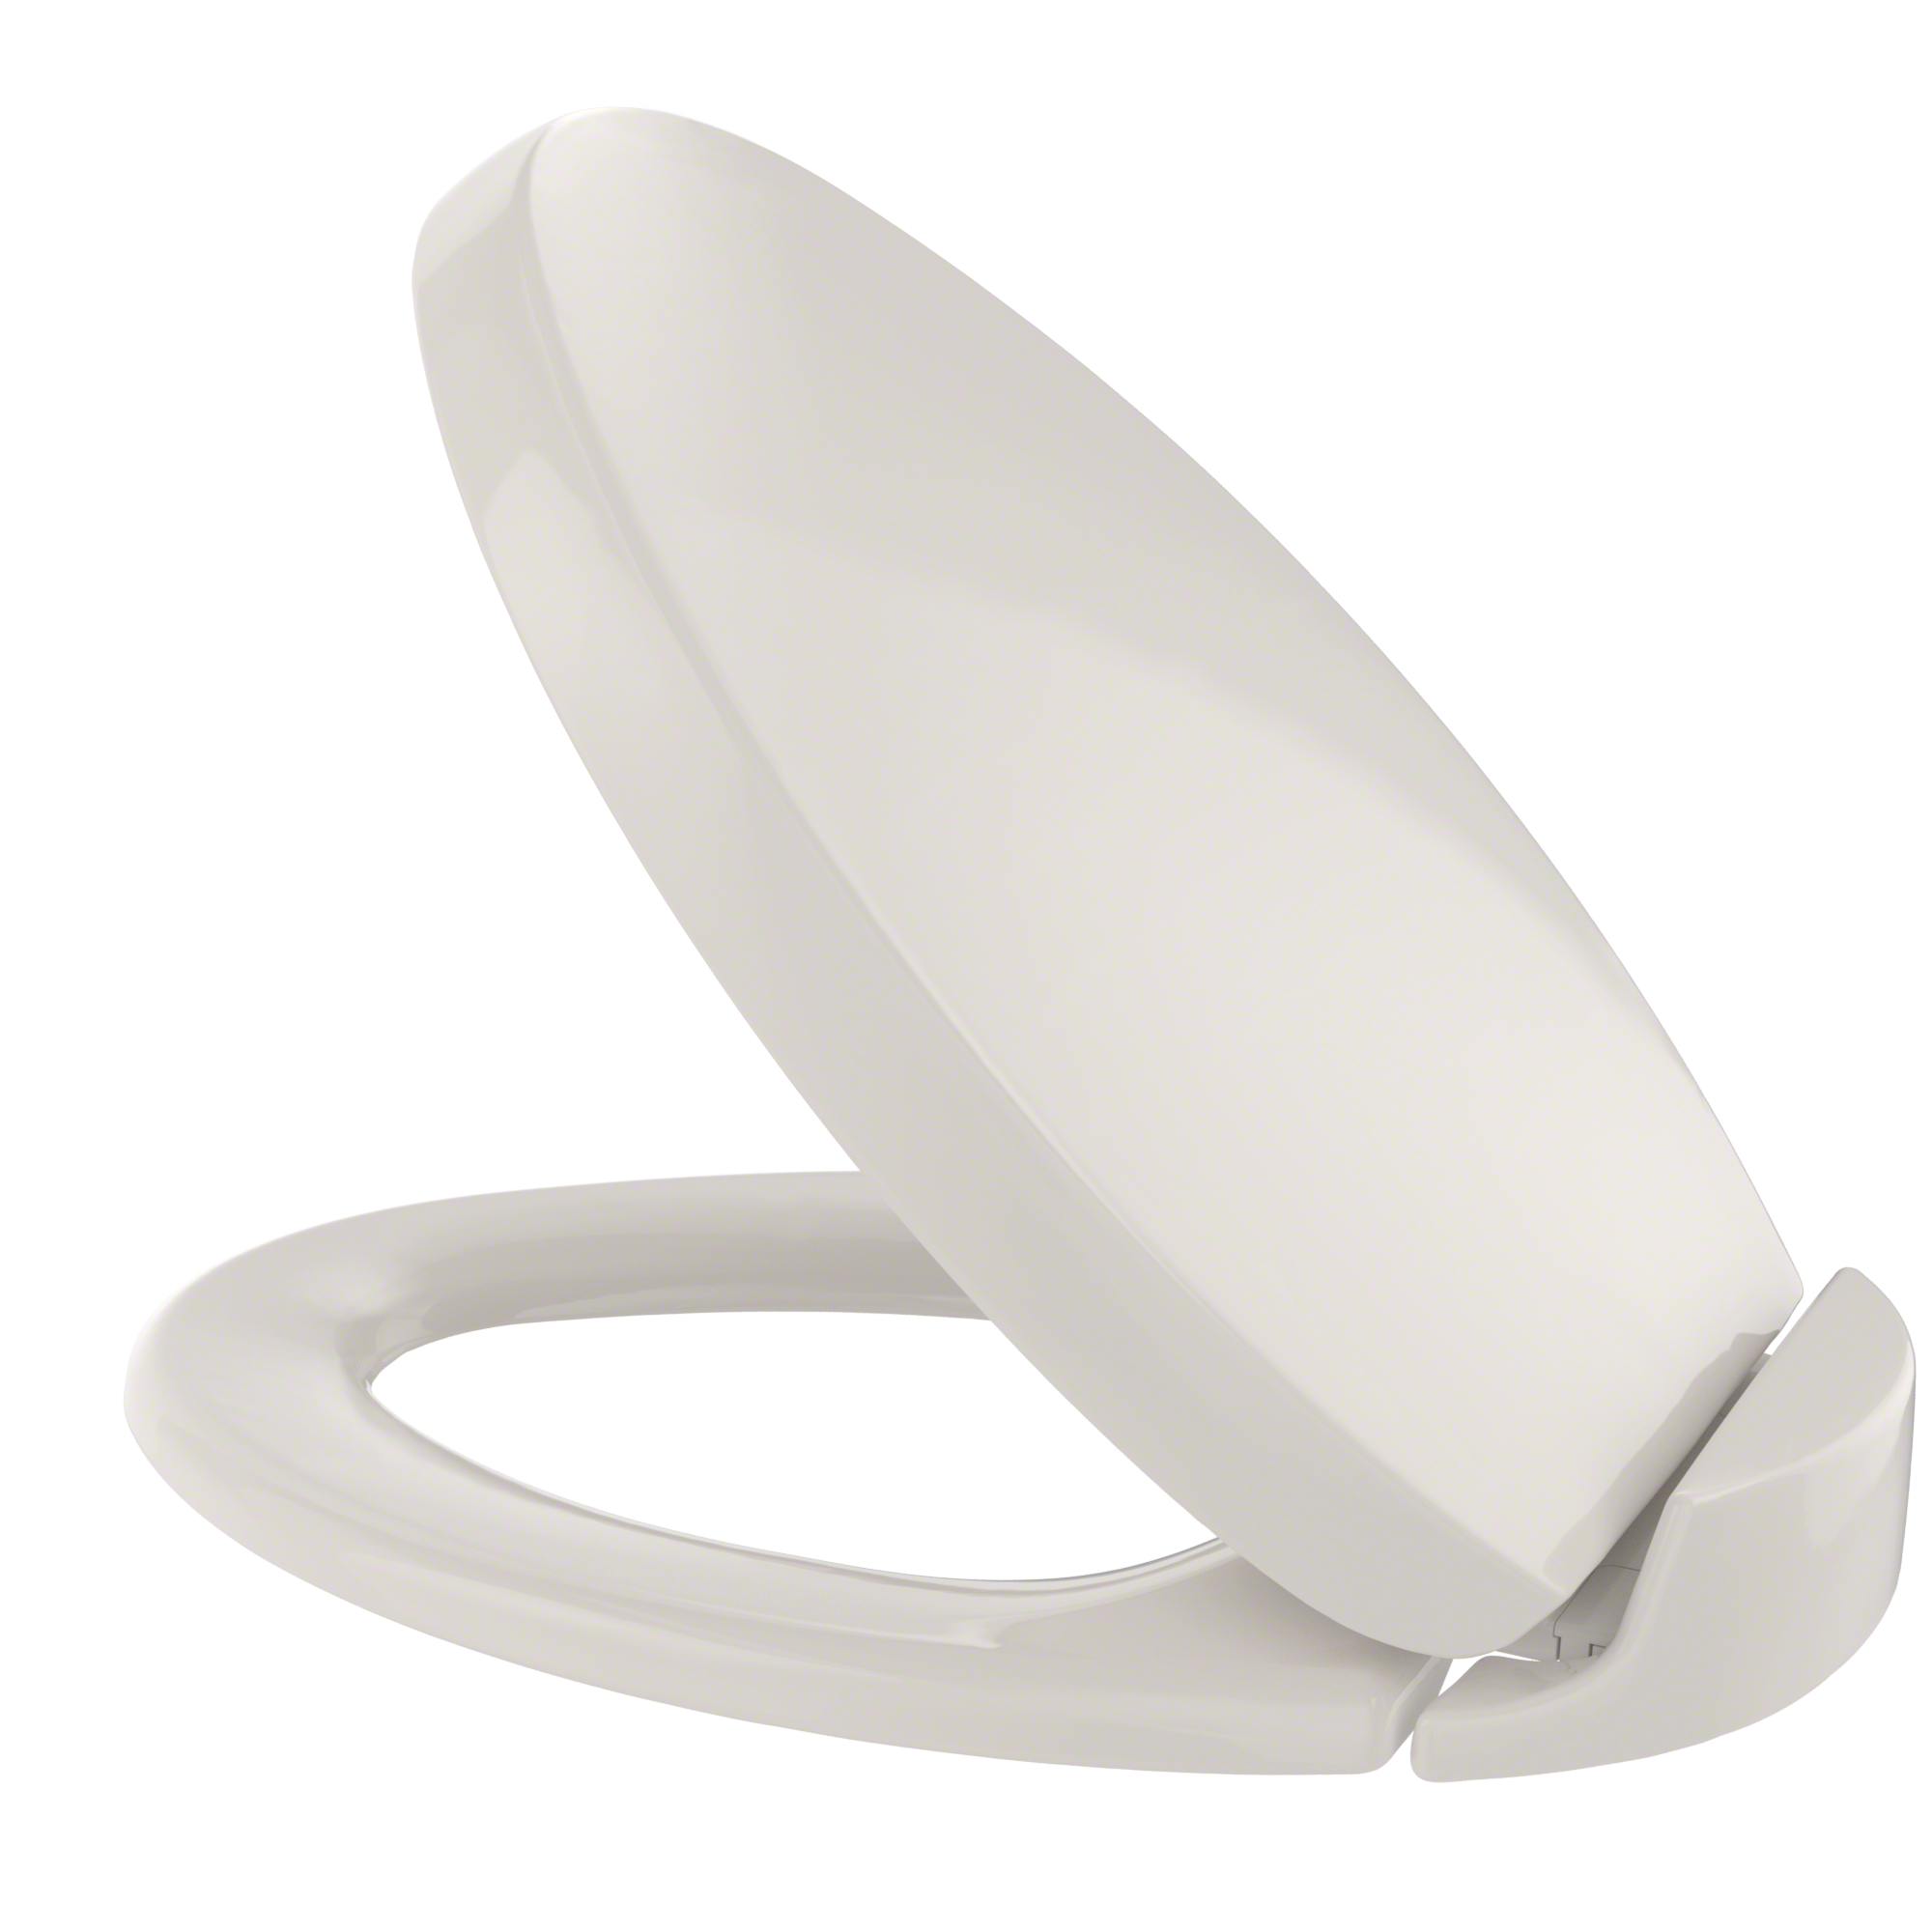 Toto - SS204#12 - Oval SoftClose Elongated Toilet Seat Sedona Beige